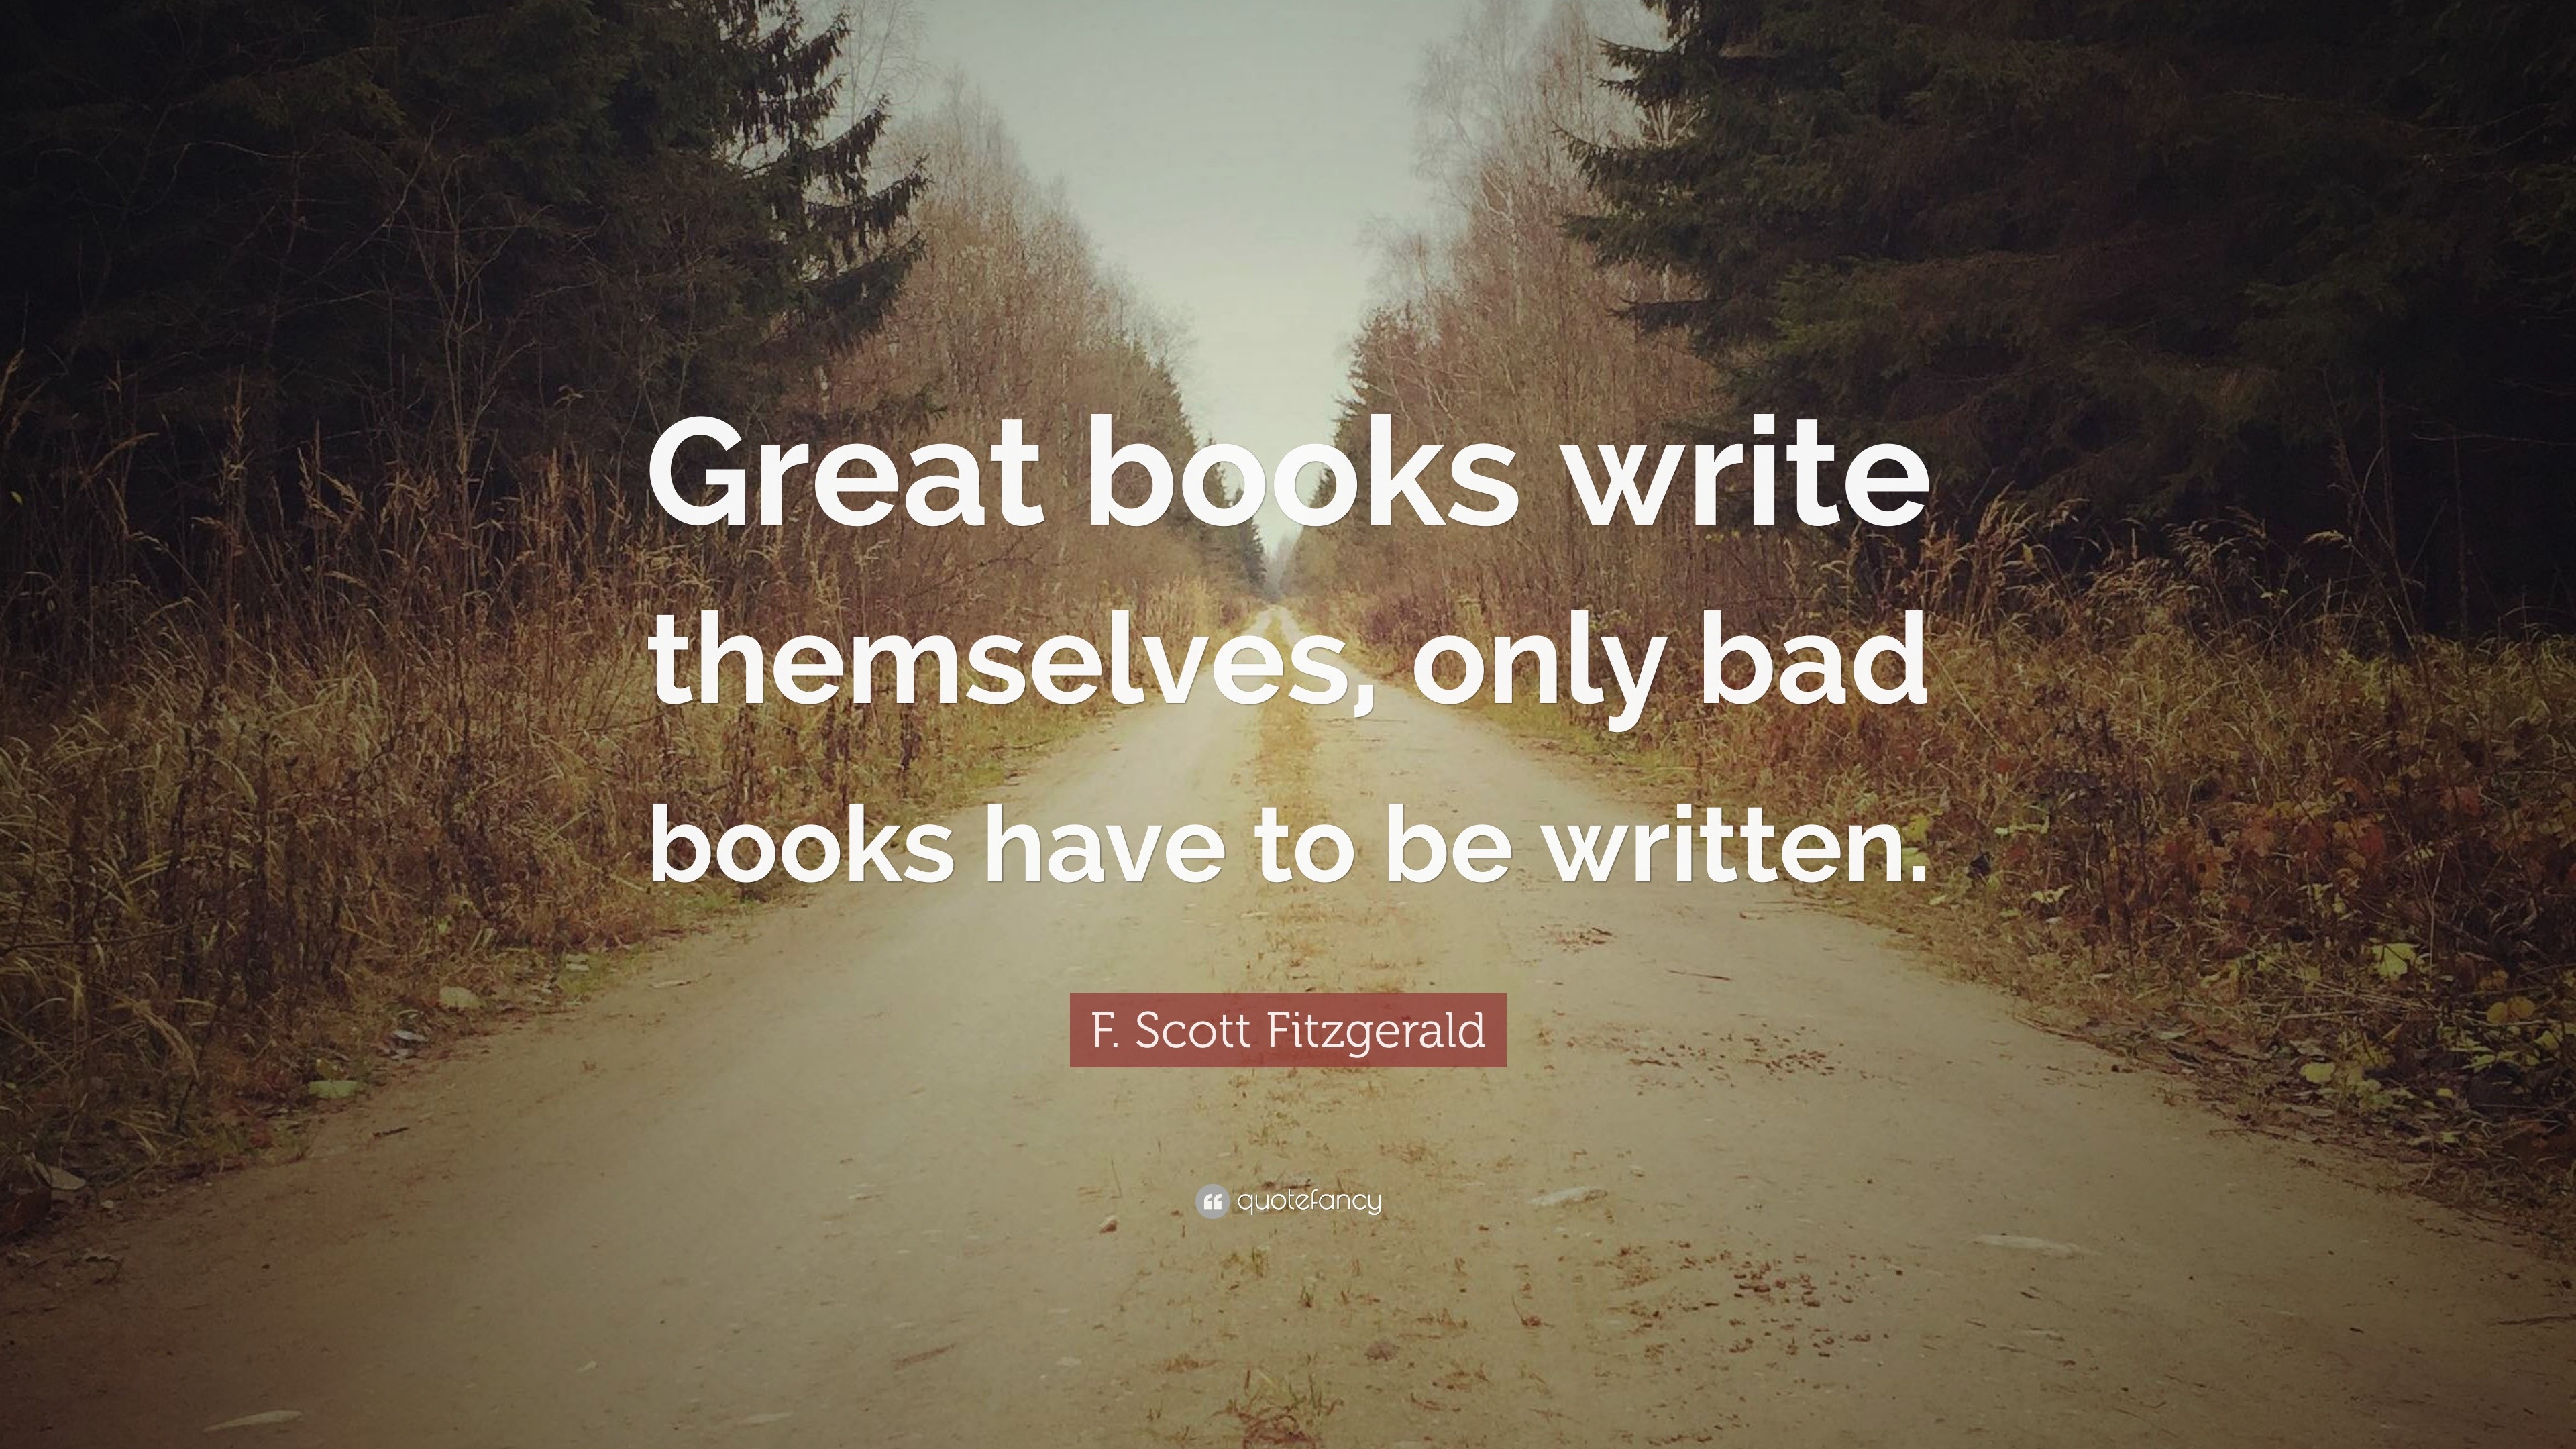 F. Scott Fitzgerald Quote: “Great books write themselves, only bad